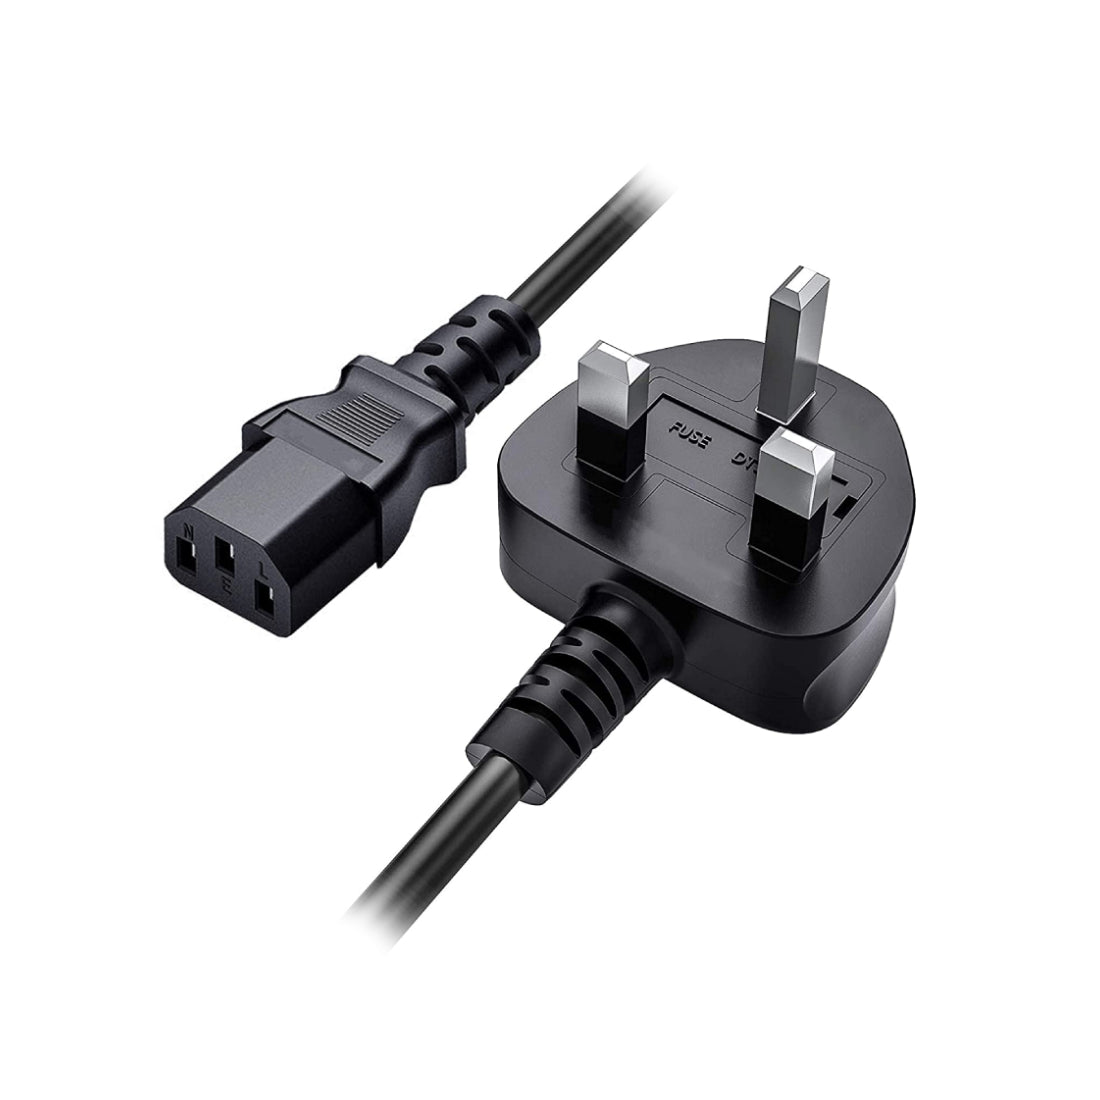 PC Power Cable - 3 Pin - 10M - كابل - Store 974 | ستور ٩٧٤